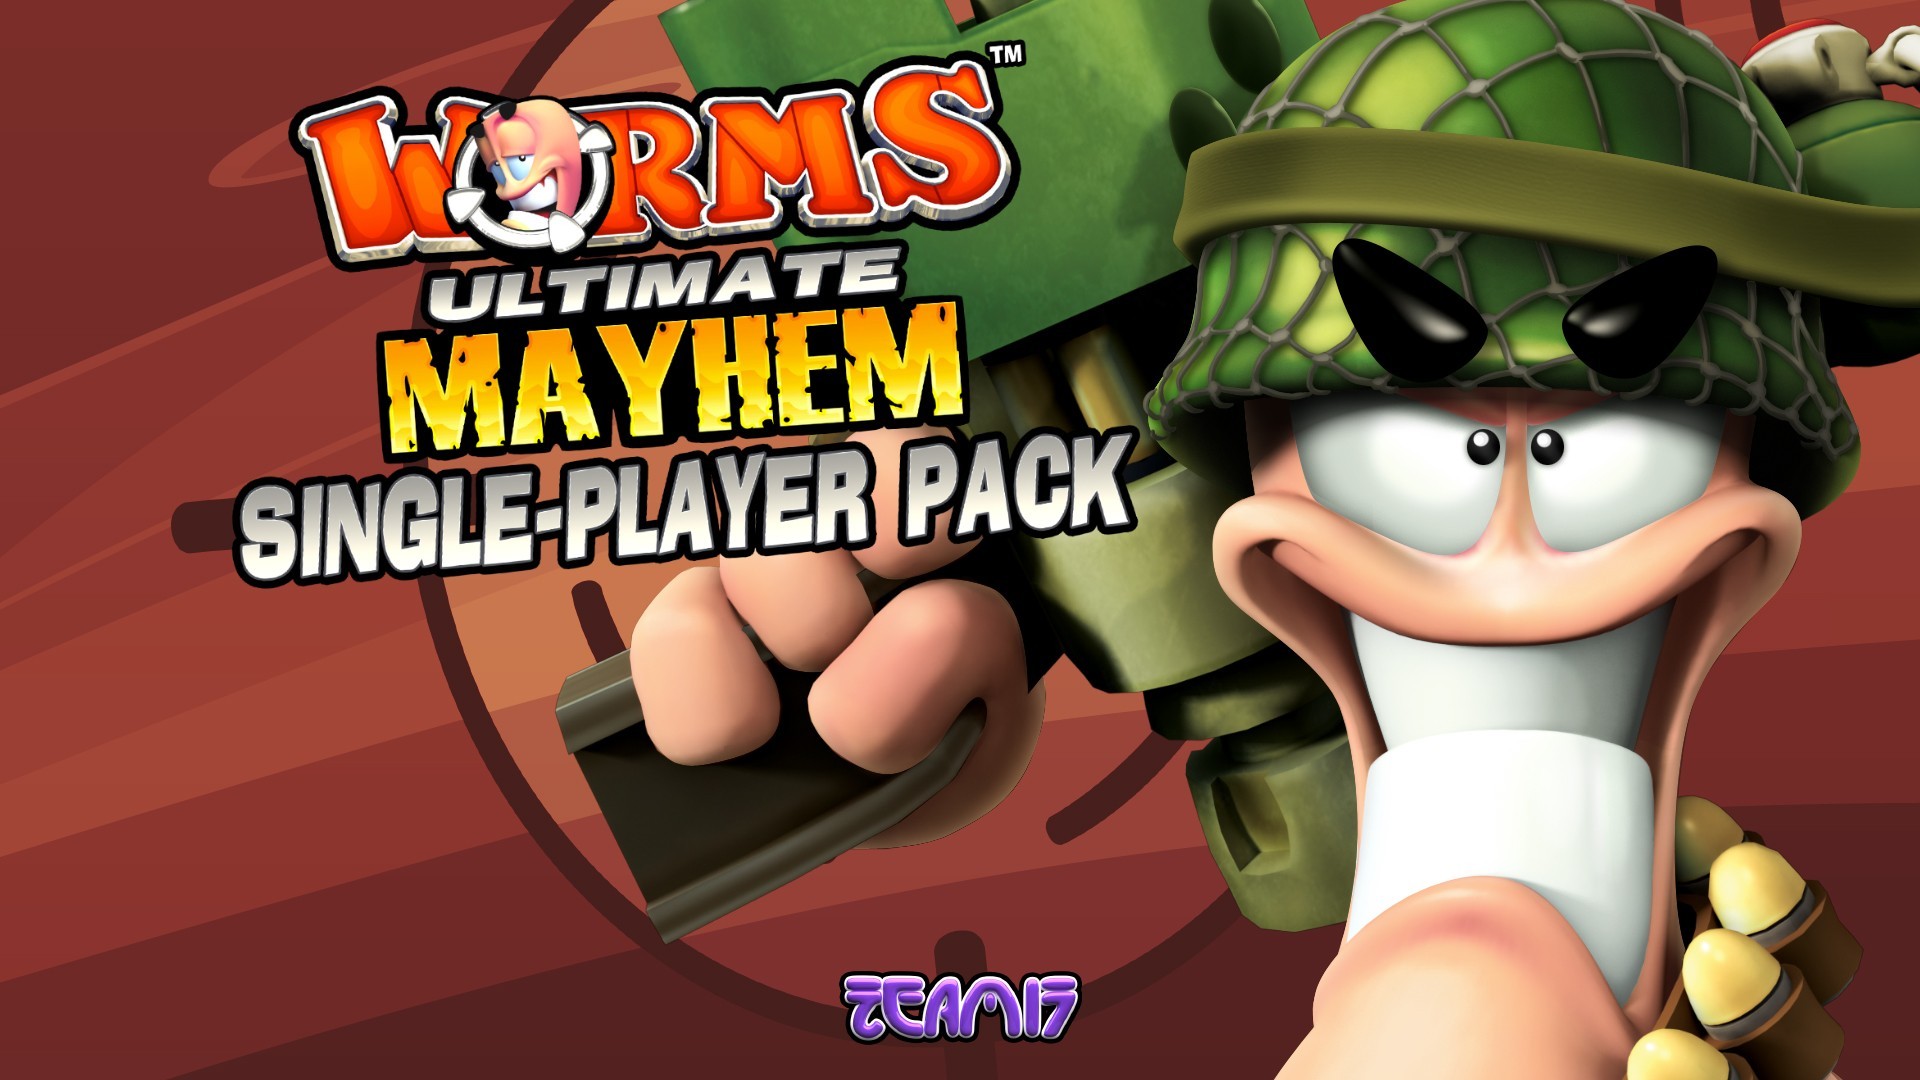 Worms, Worms Ultimate Mayhen Wallpaper